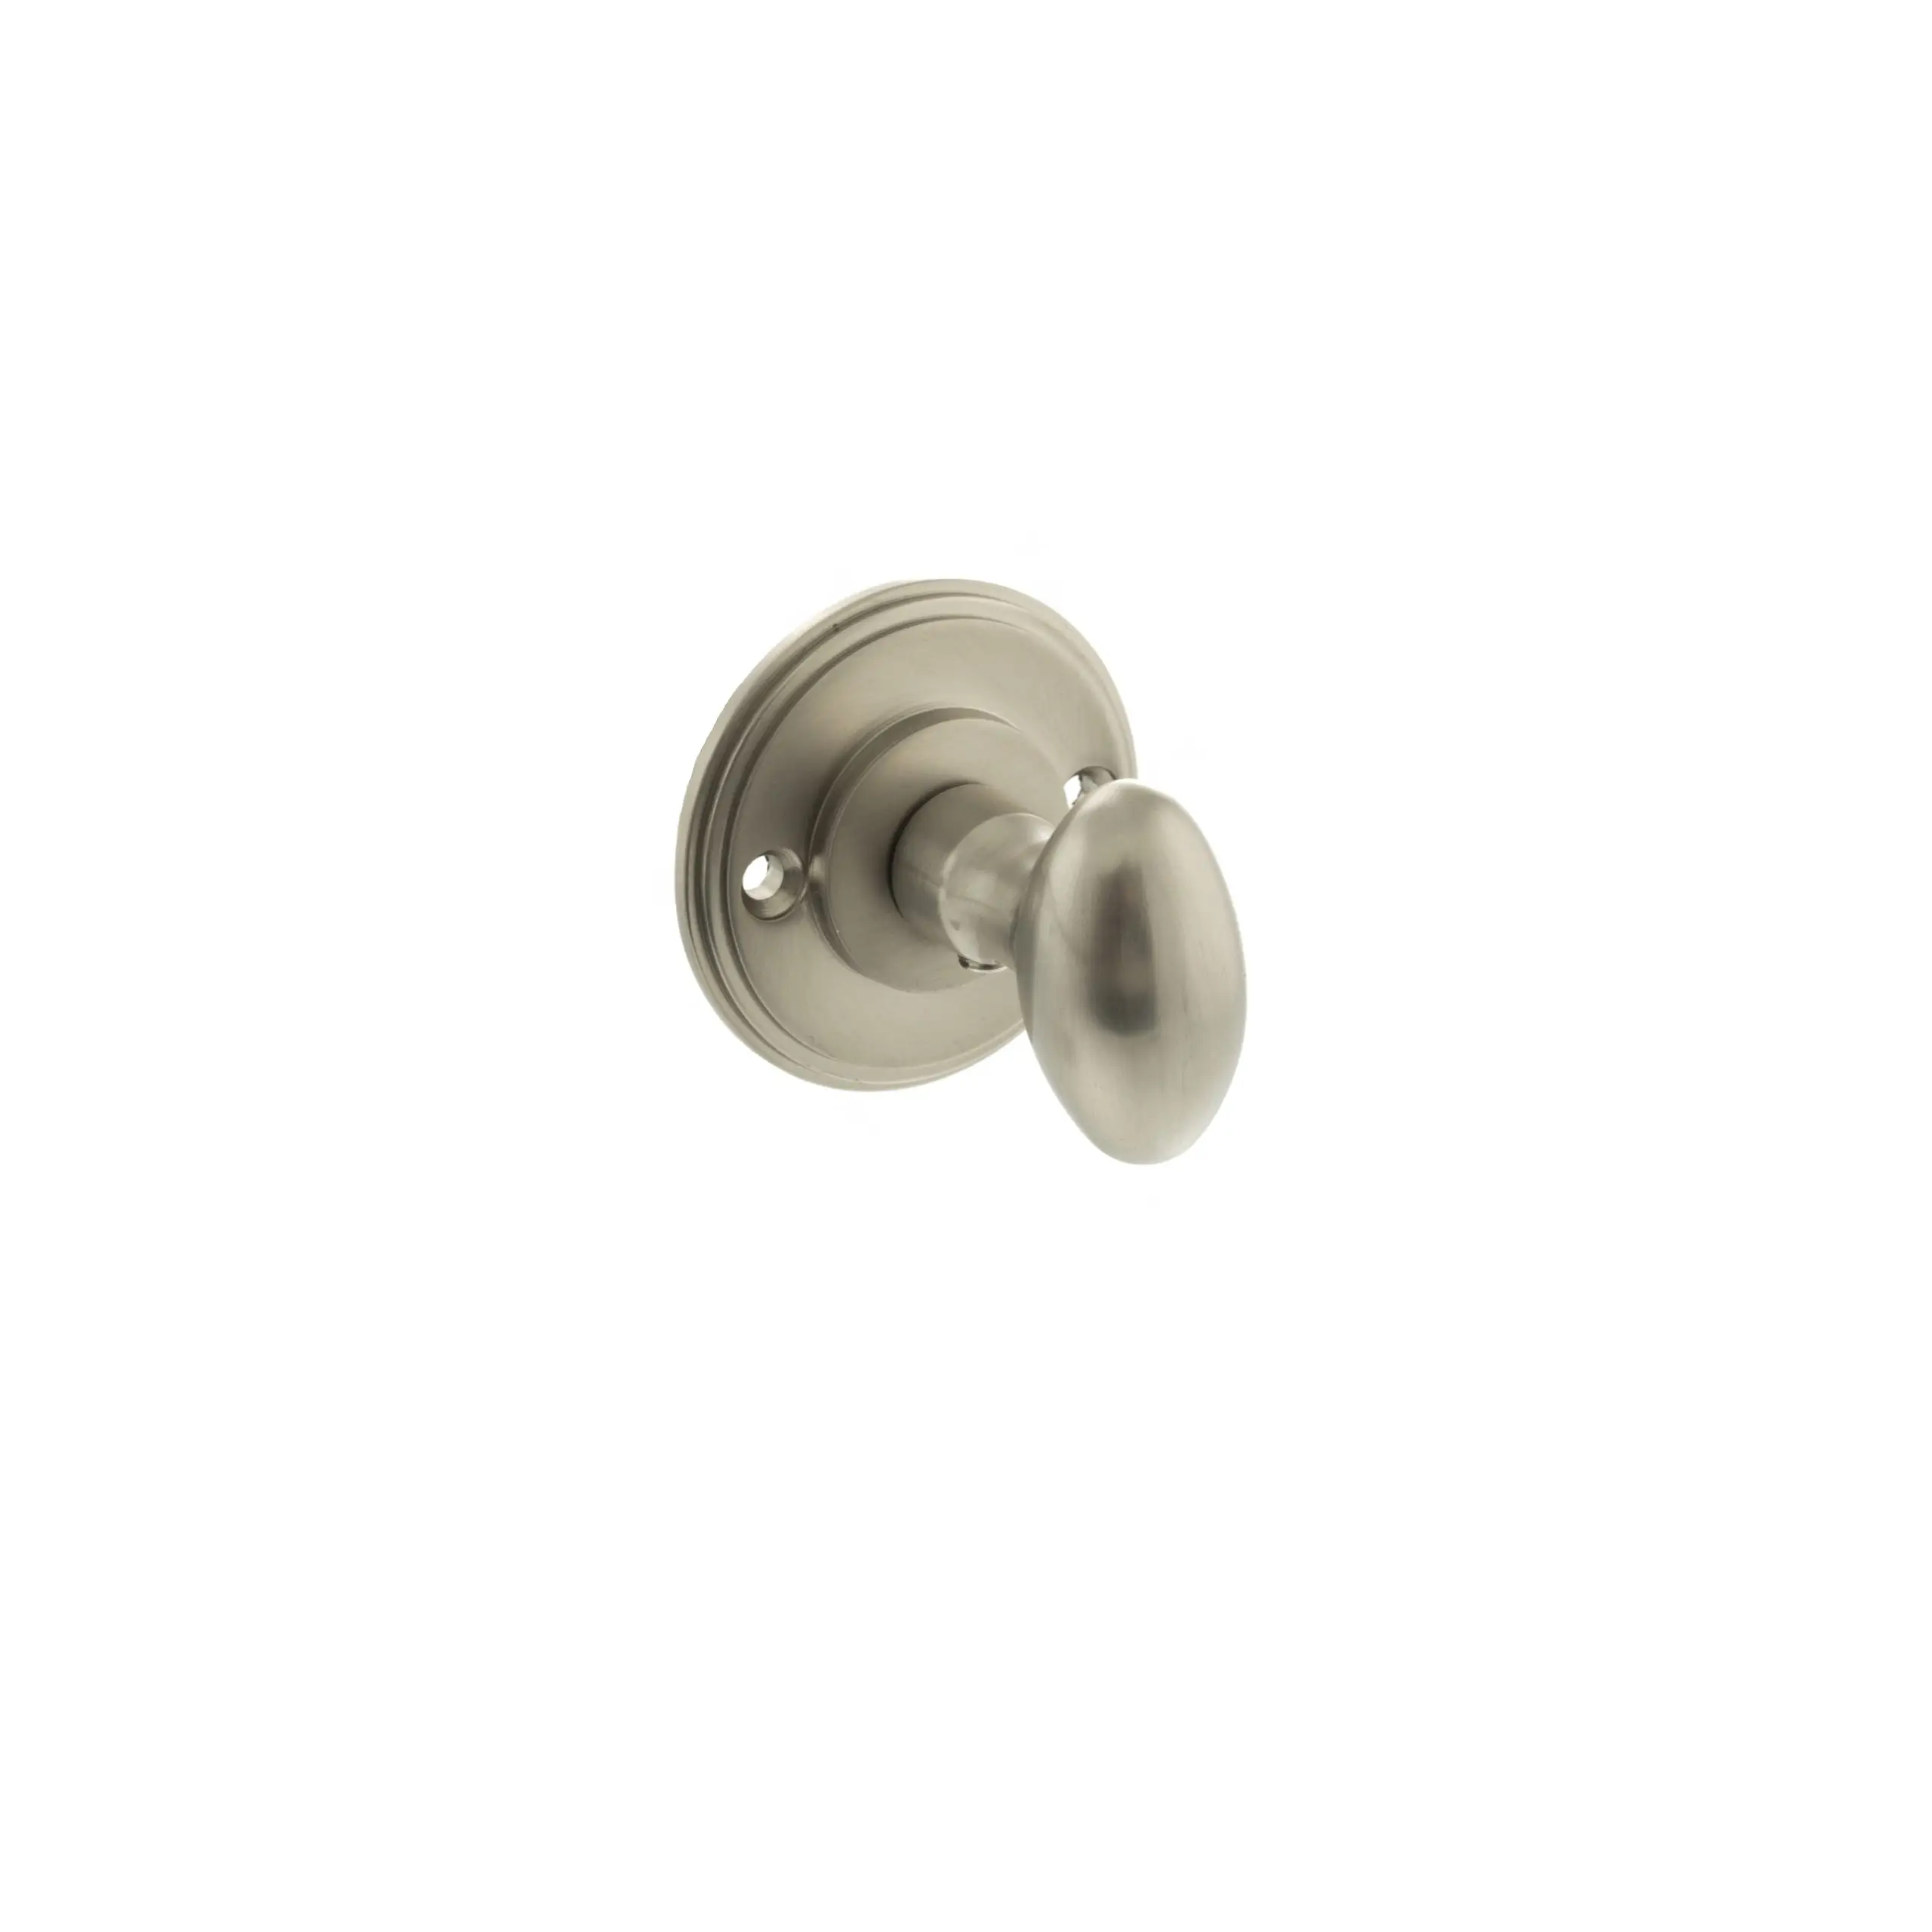 MHOWCSN_MILLHOUSE-BRASS-WC-TURN-TO-SUIT-MORTICE-KNOBS_SATIN-NICKEL_1_HR-scaled.jpg